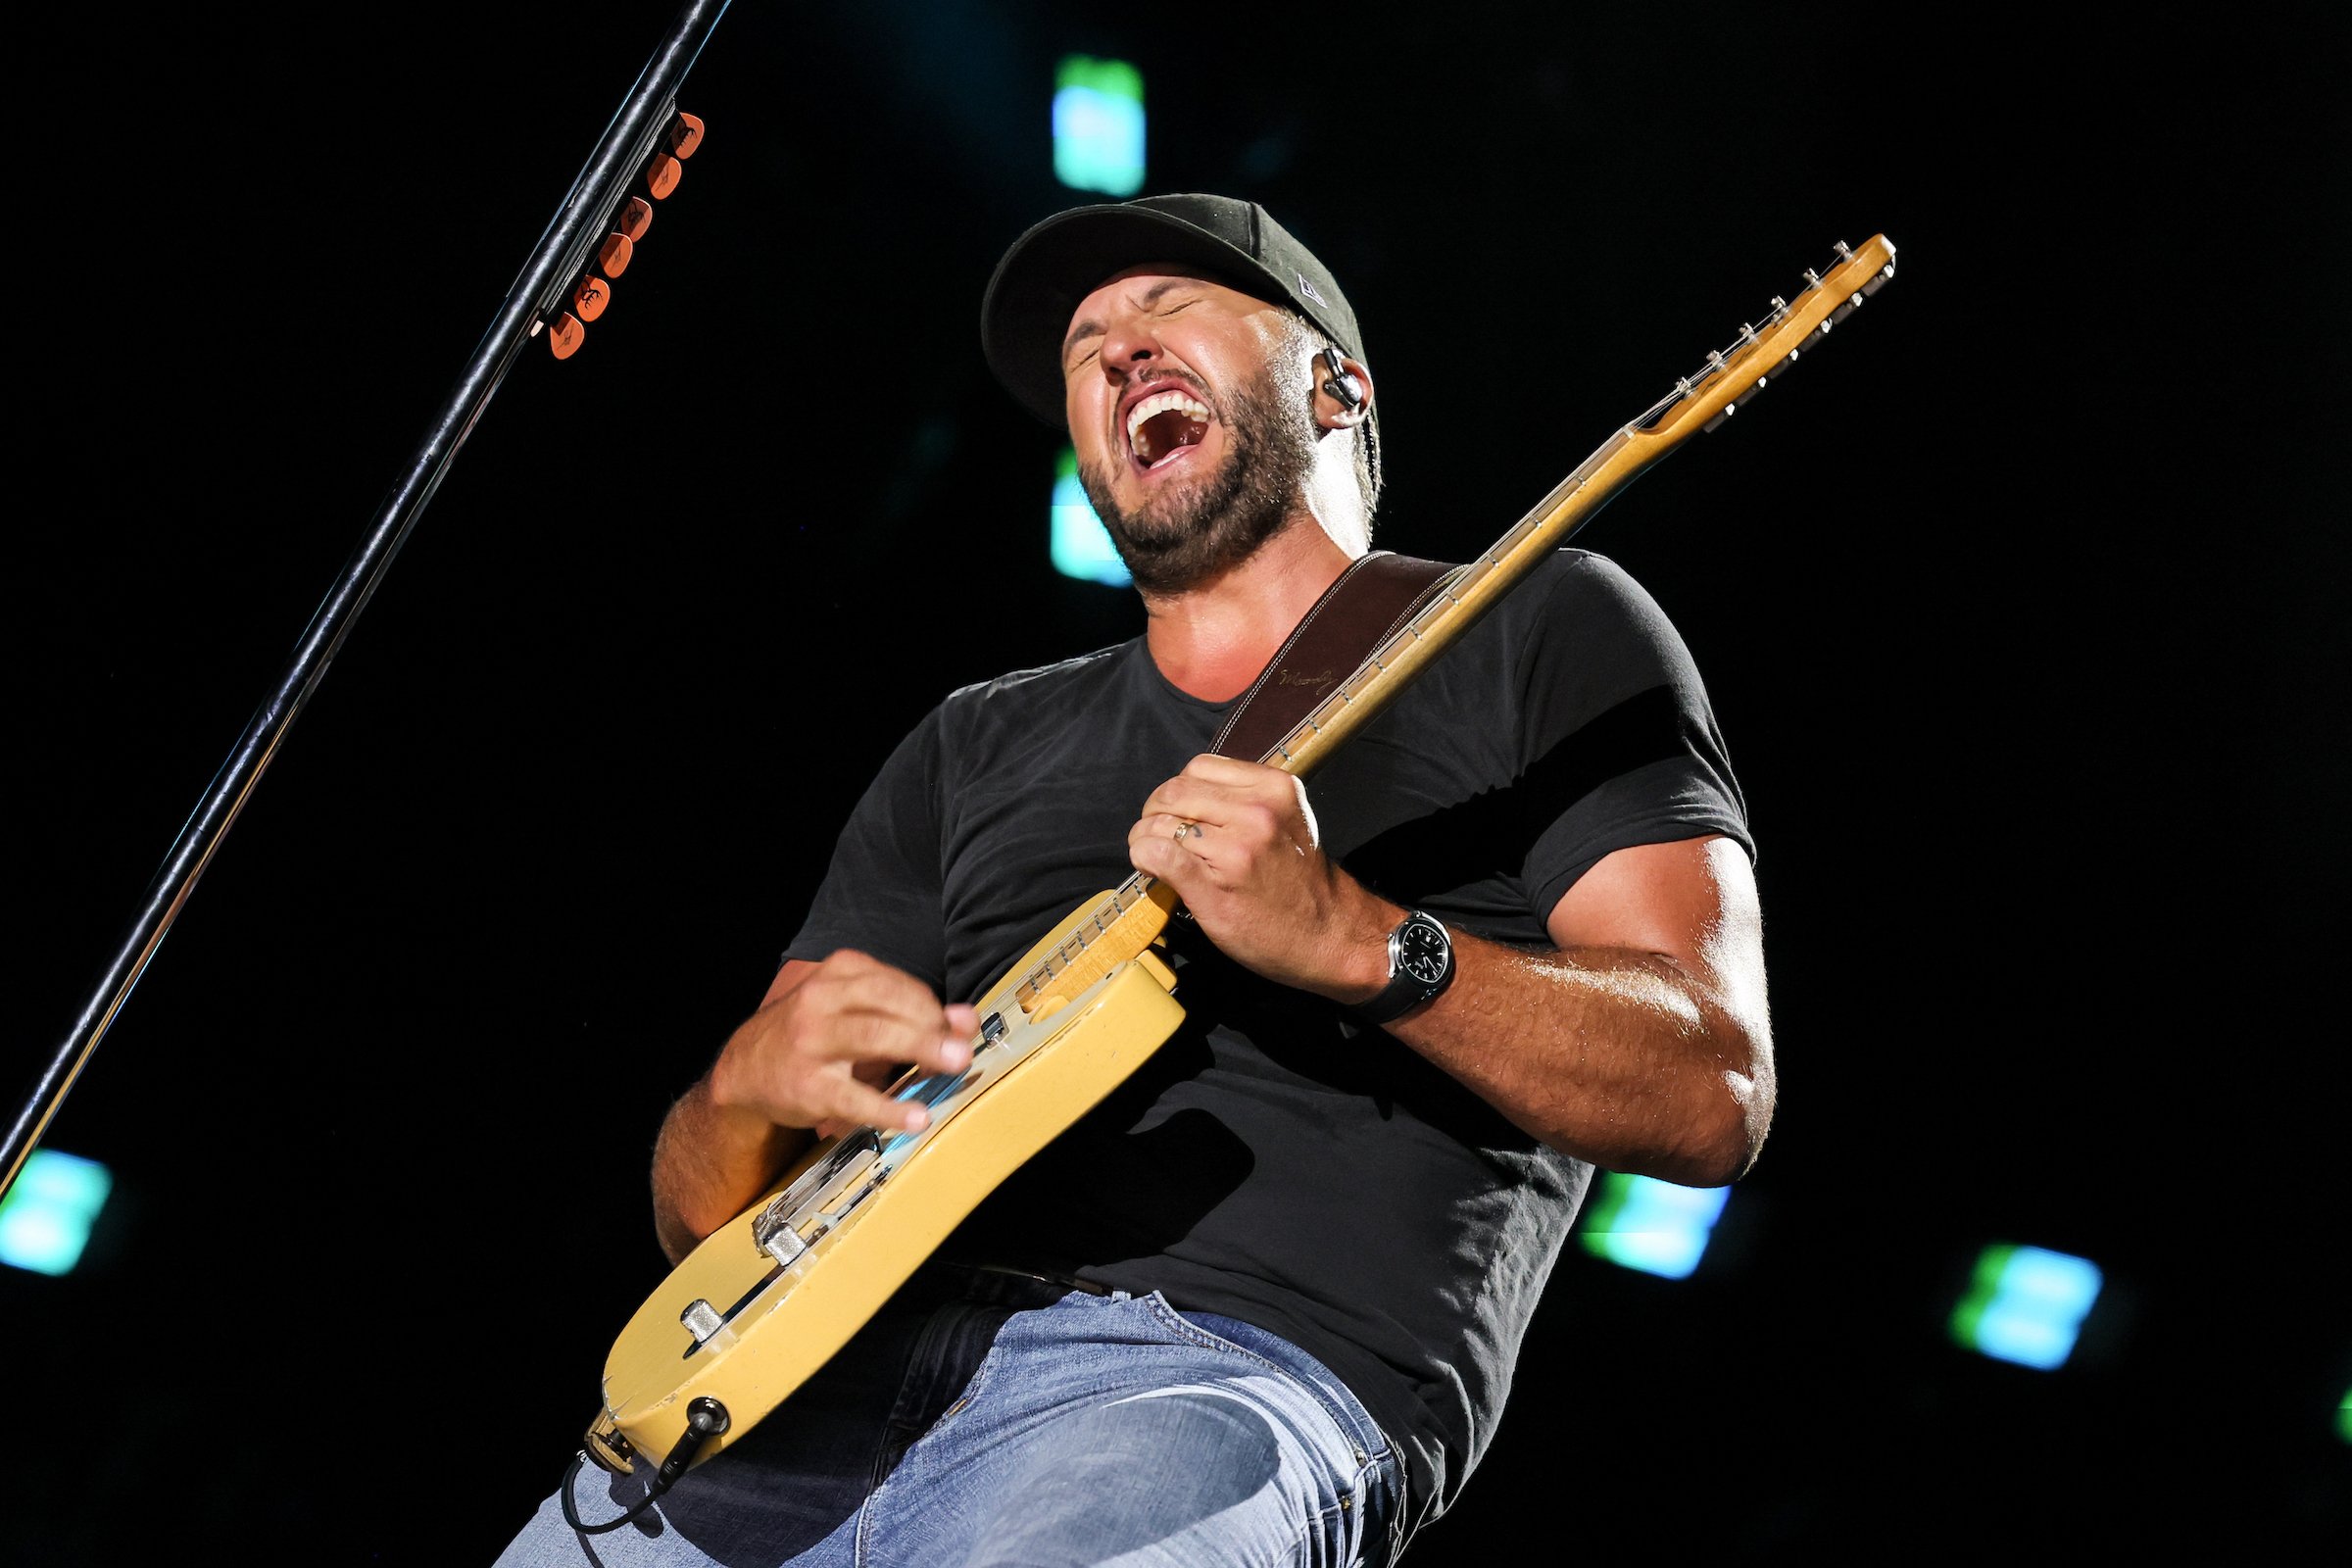 Luke Bryan performs during day 3 of CMA Fest 2022